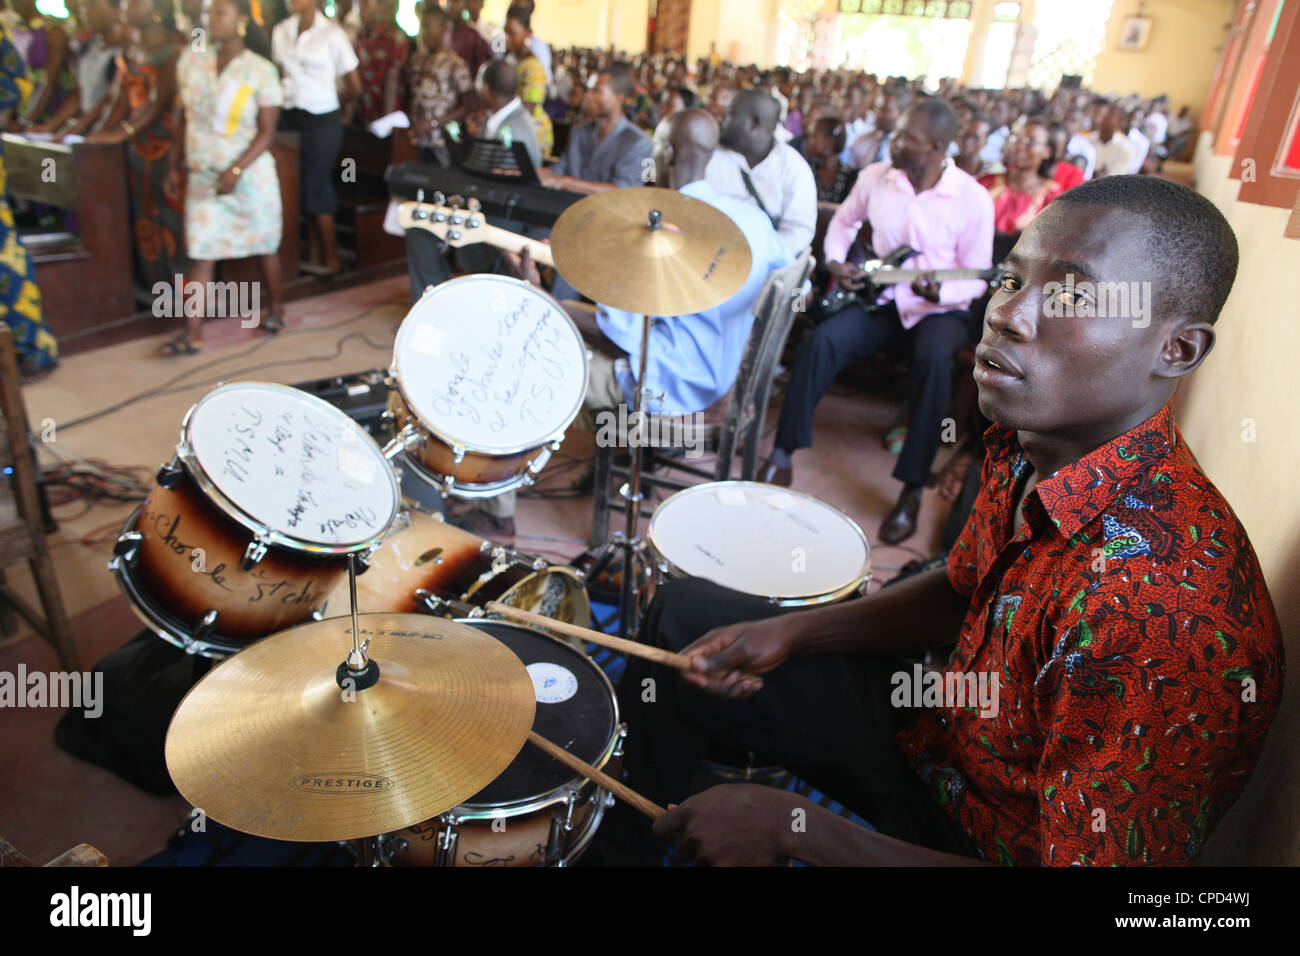 Catholic Mass in an African church, Lome, Togo, West Africa, Africa Stock Photo